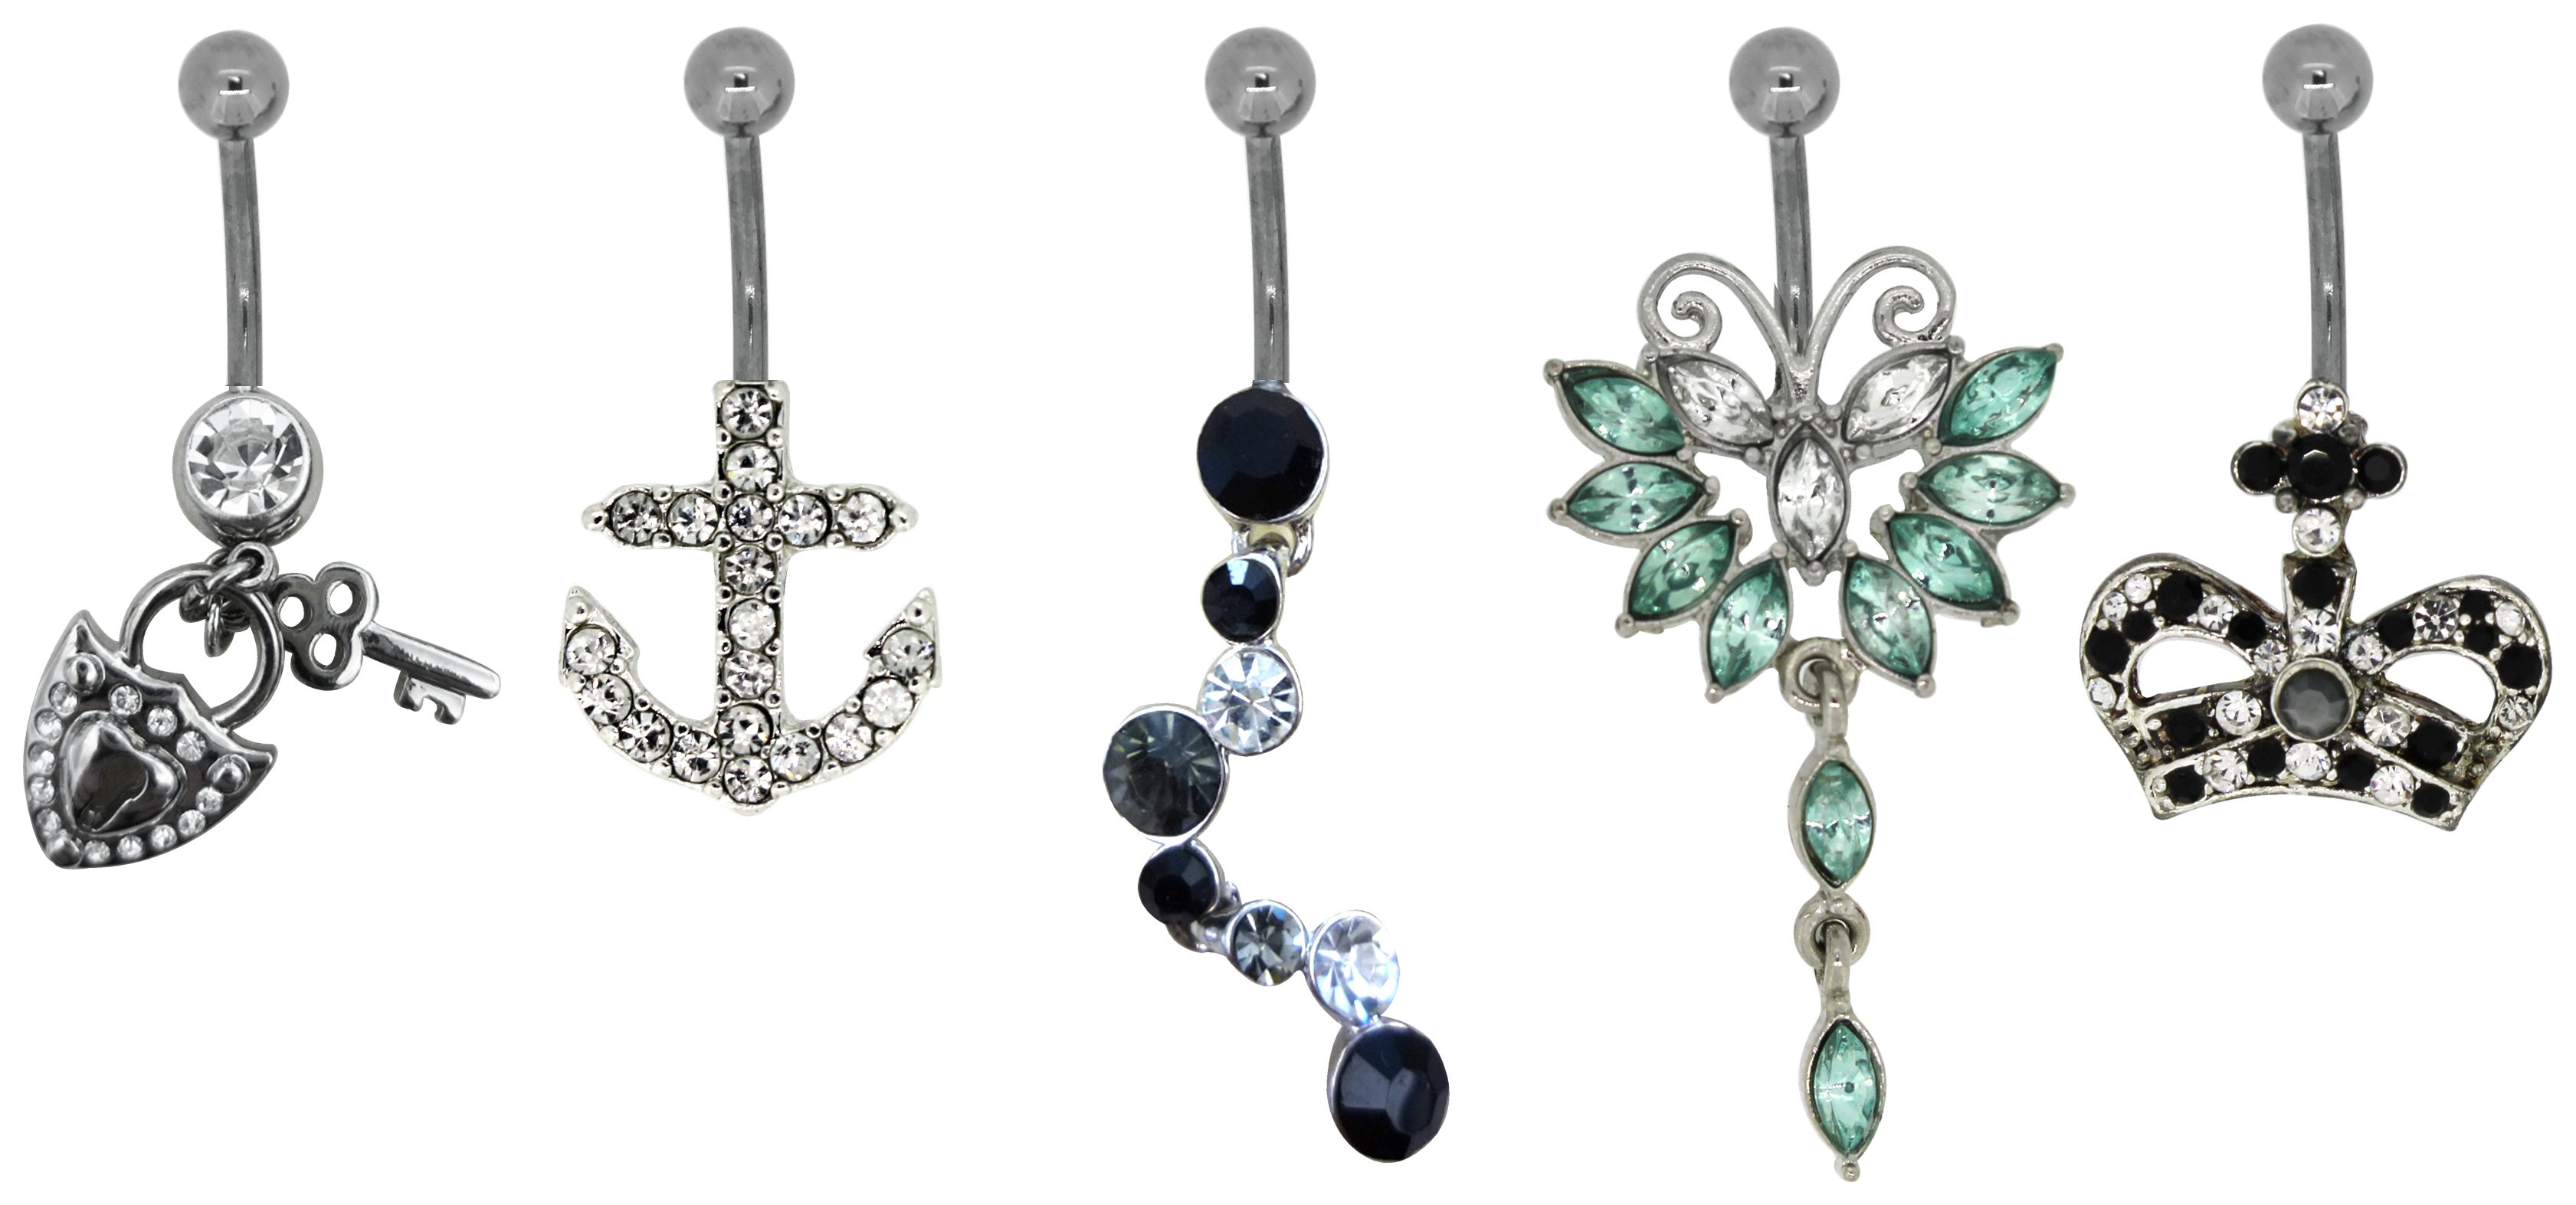 Metal Crown and Anchor Belly Bars - Set of 5.